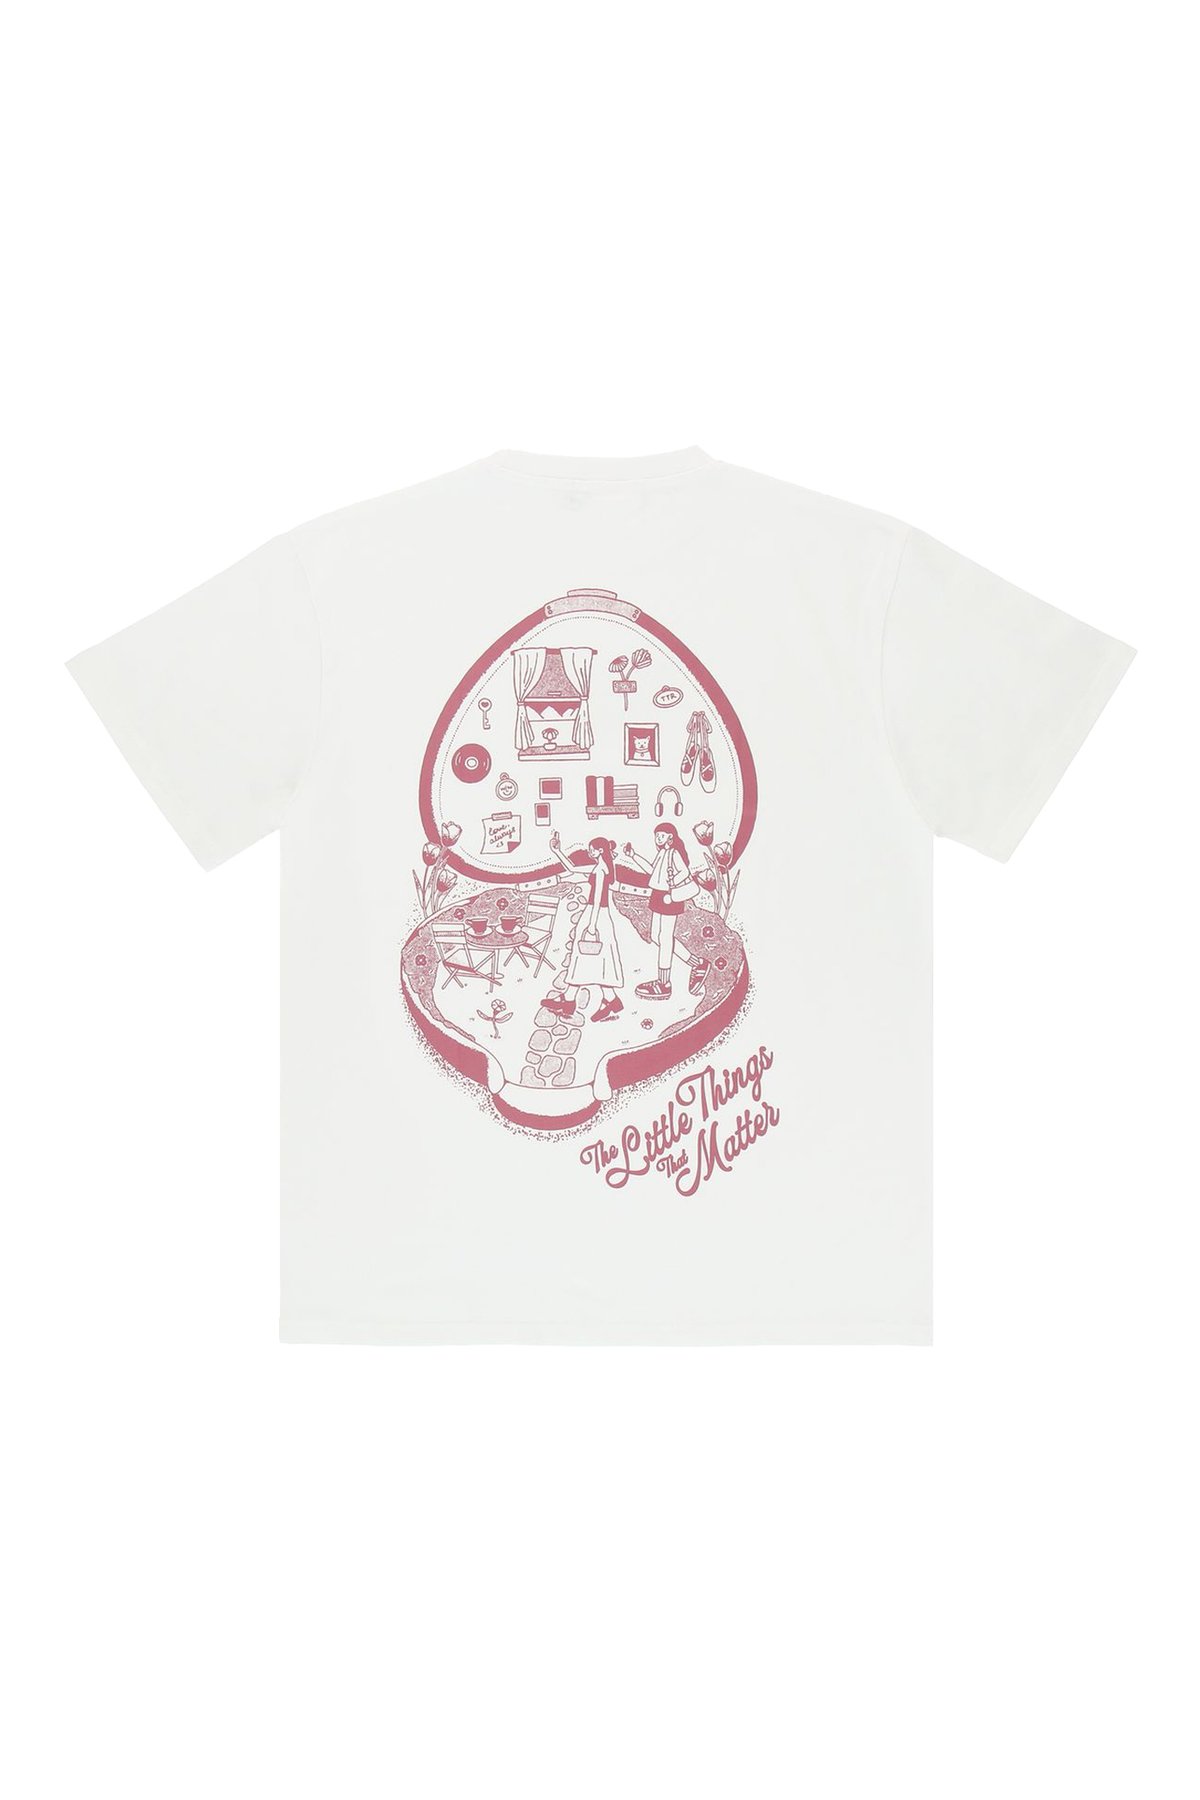 The Little Things That Matter Oversized Tee (White)